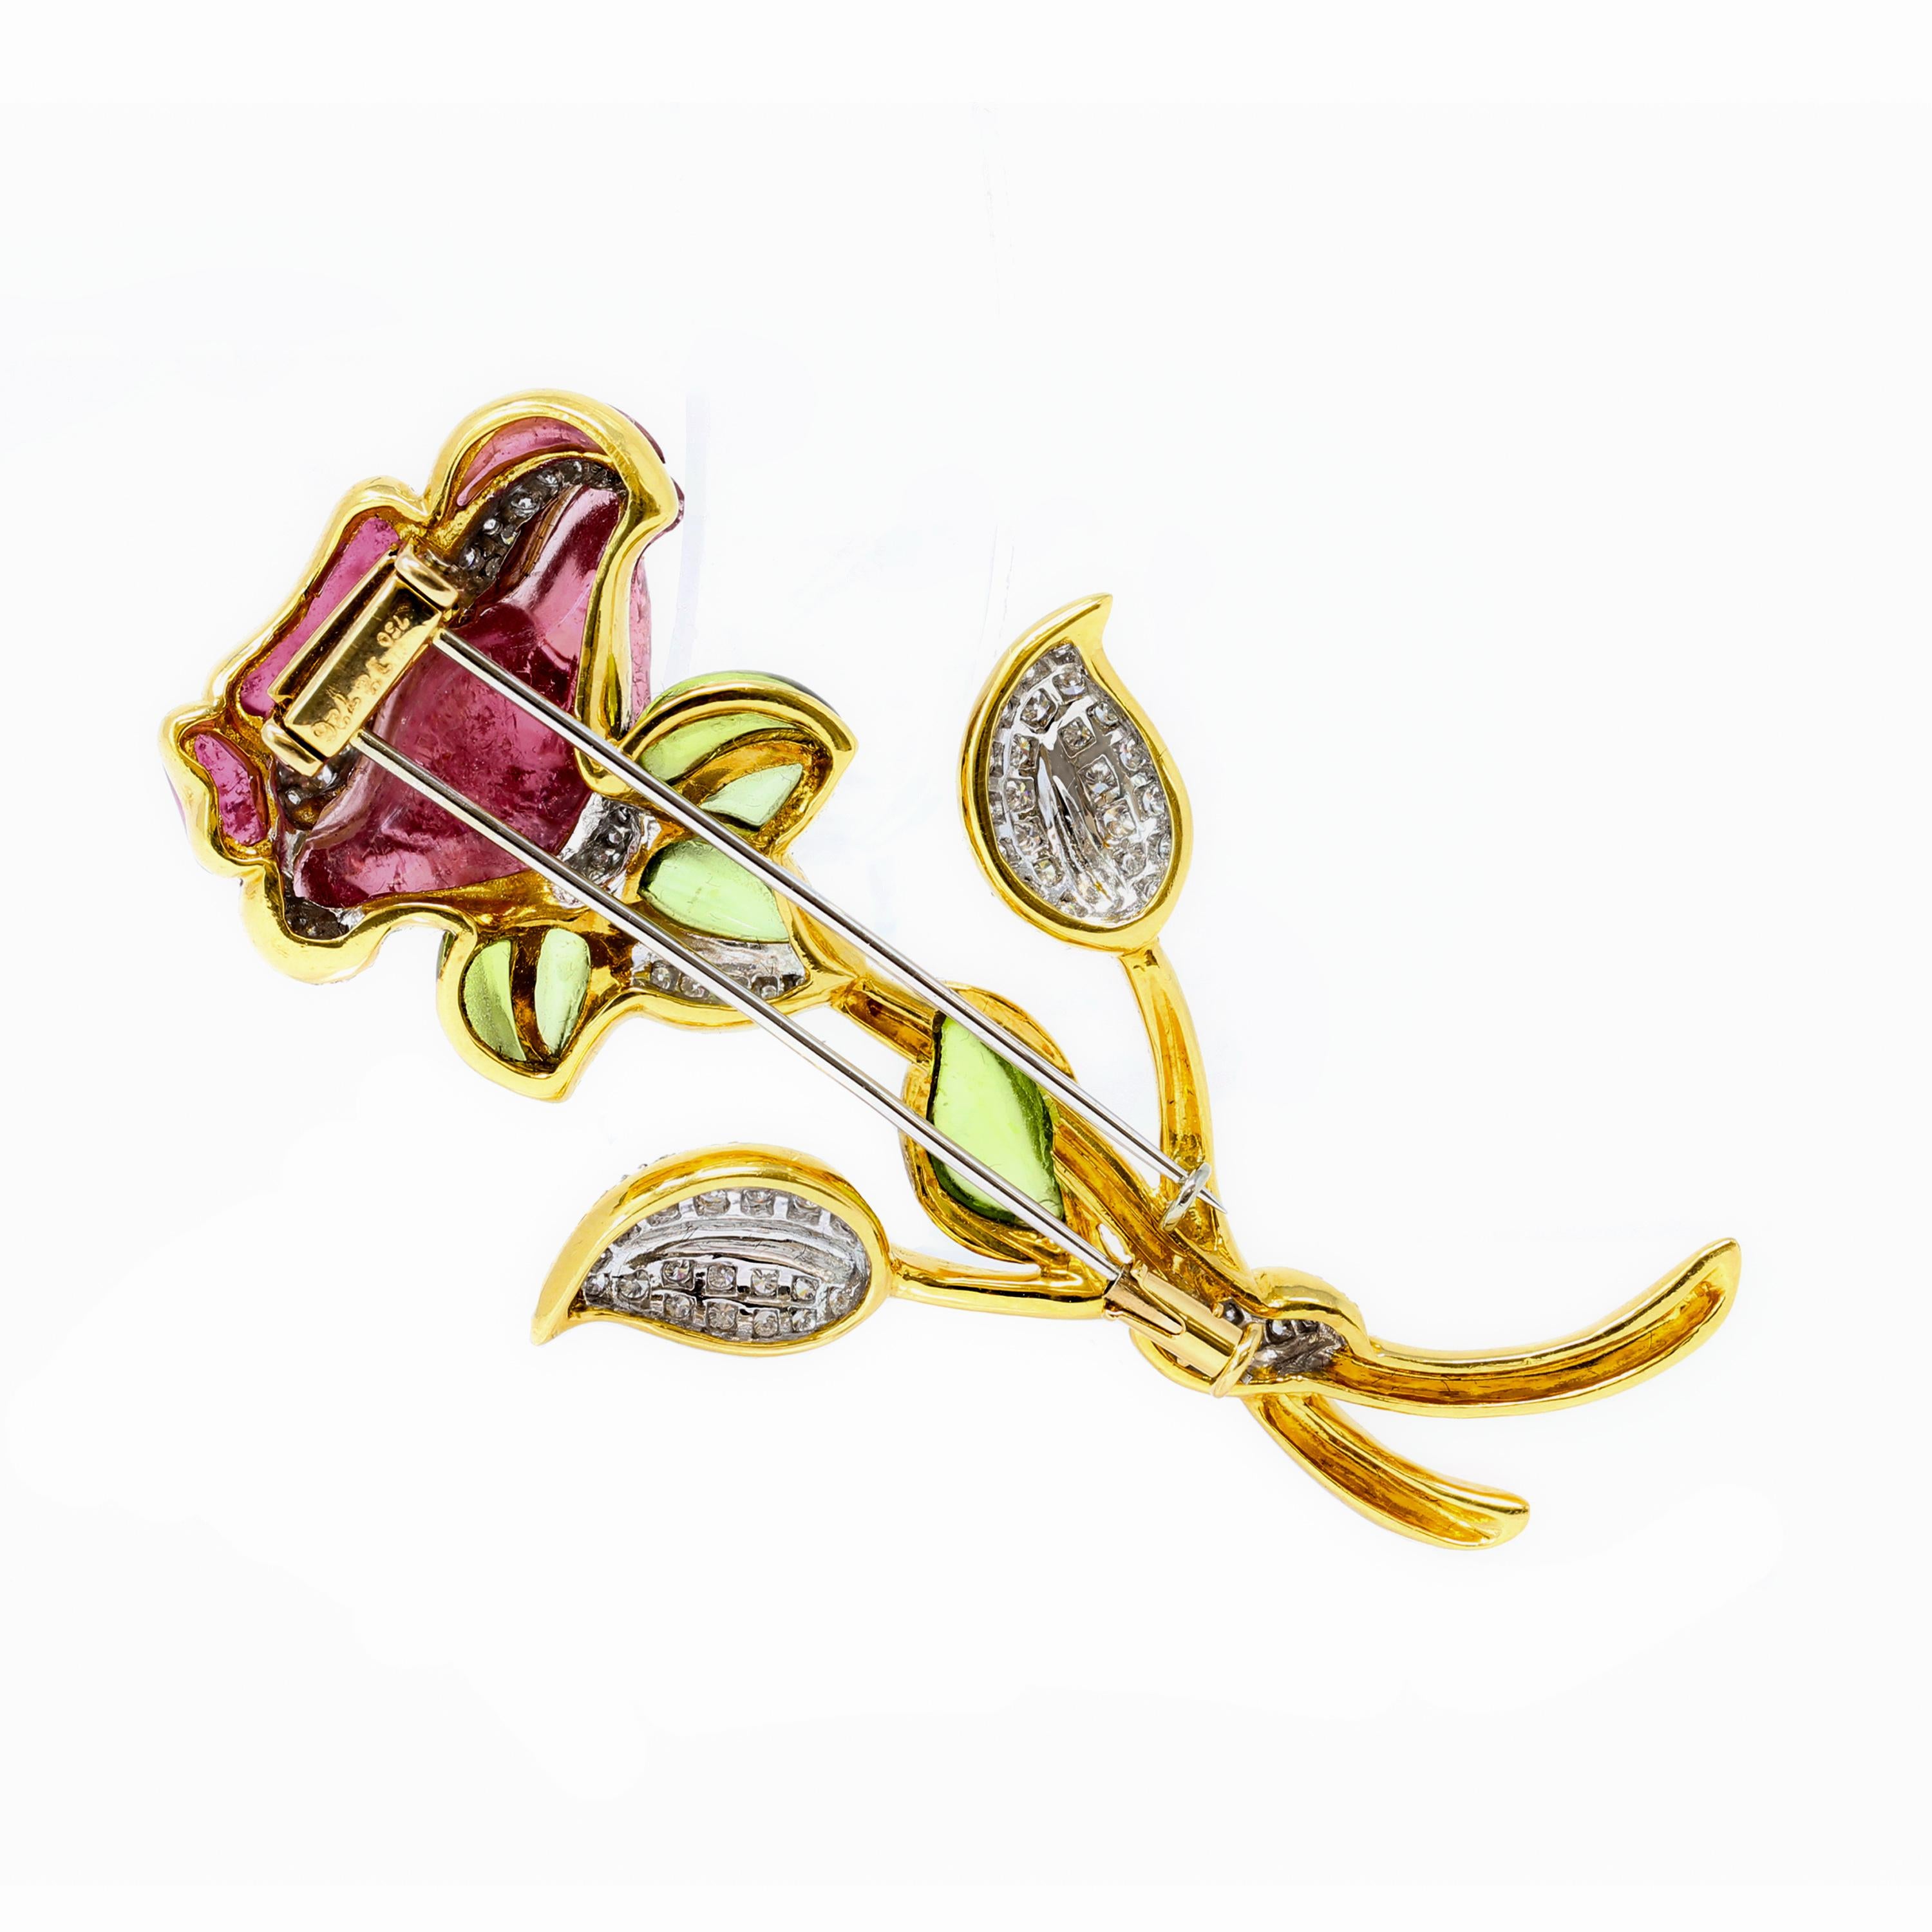 A carved pink tourmaline and peridot flower brooch with pavé set diamonds in 18k yellow gold. The skillfully hand carved tourmaline flower and Peridot leaves are enhanced by an estimated 0.80 carats of diamonds graded GH color VS clarity. The